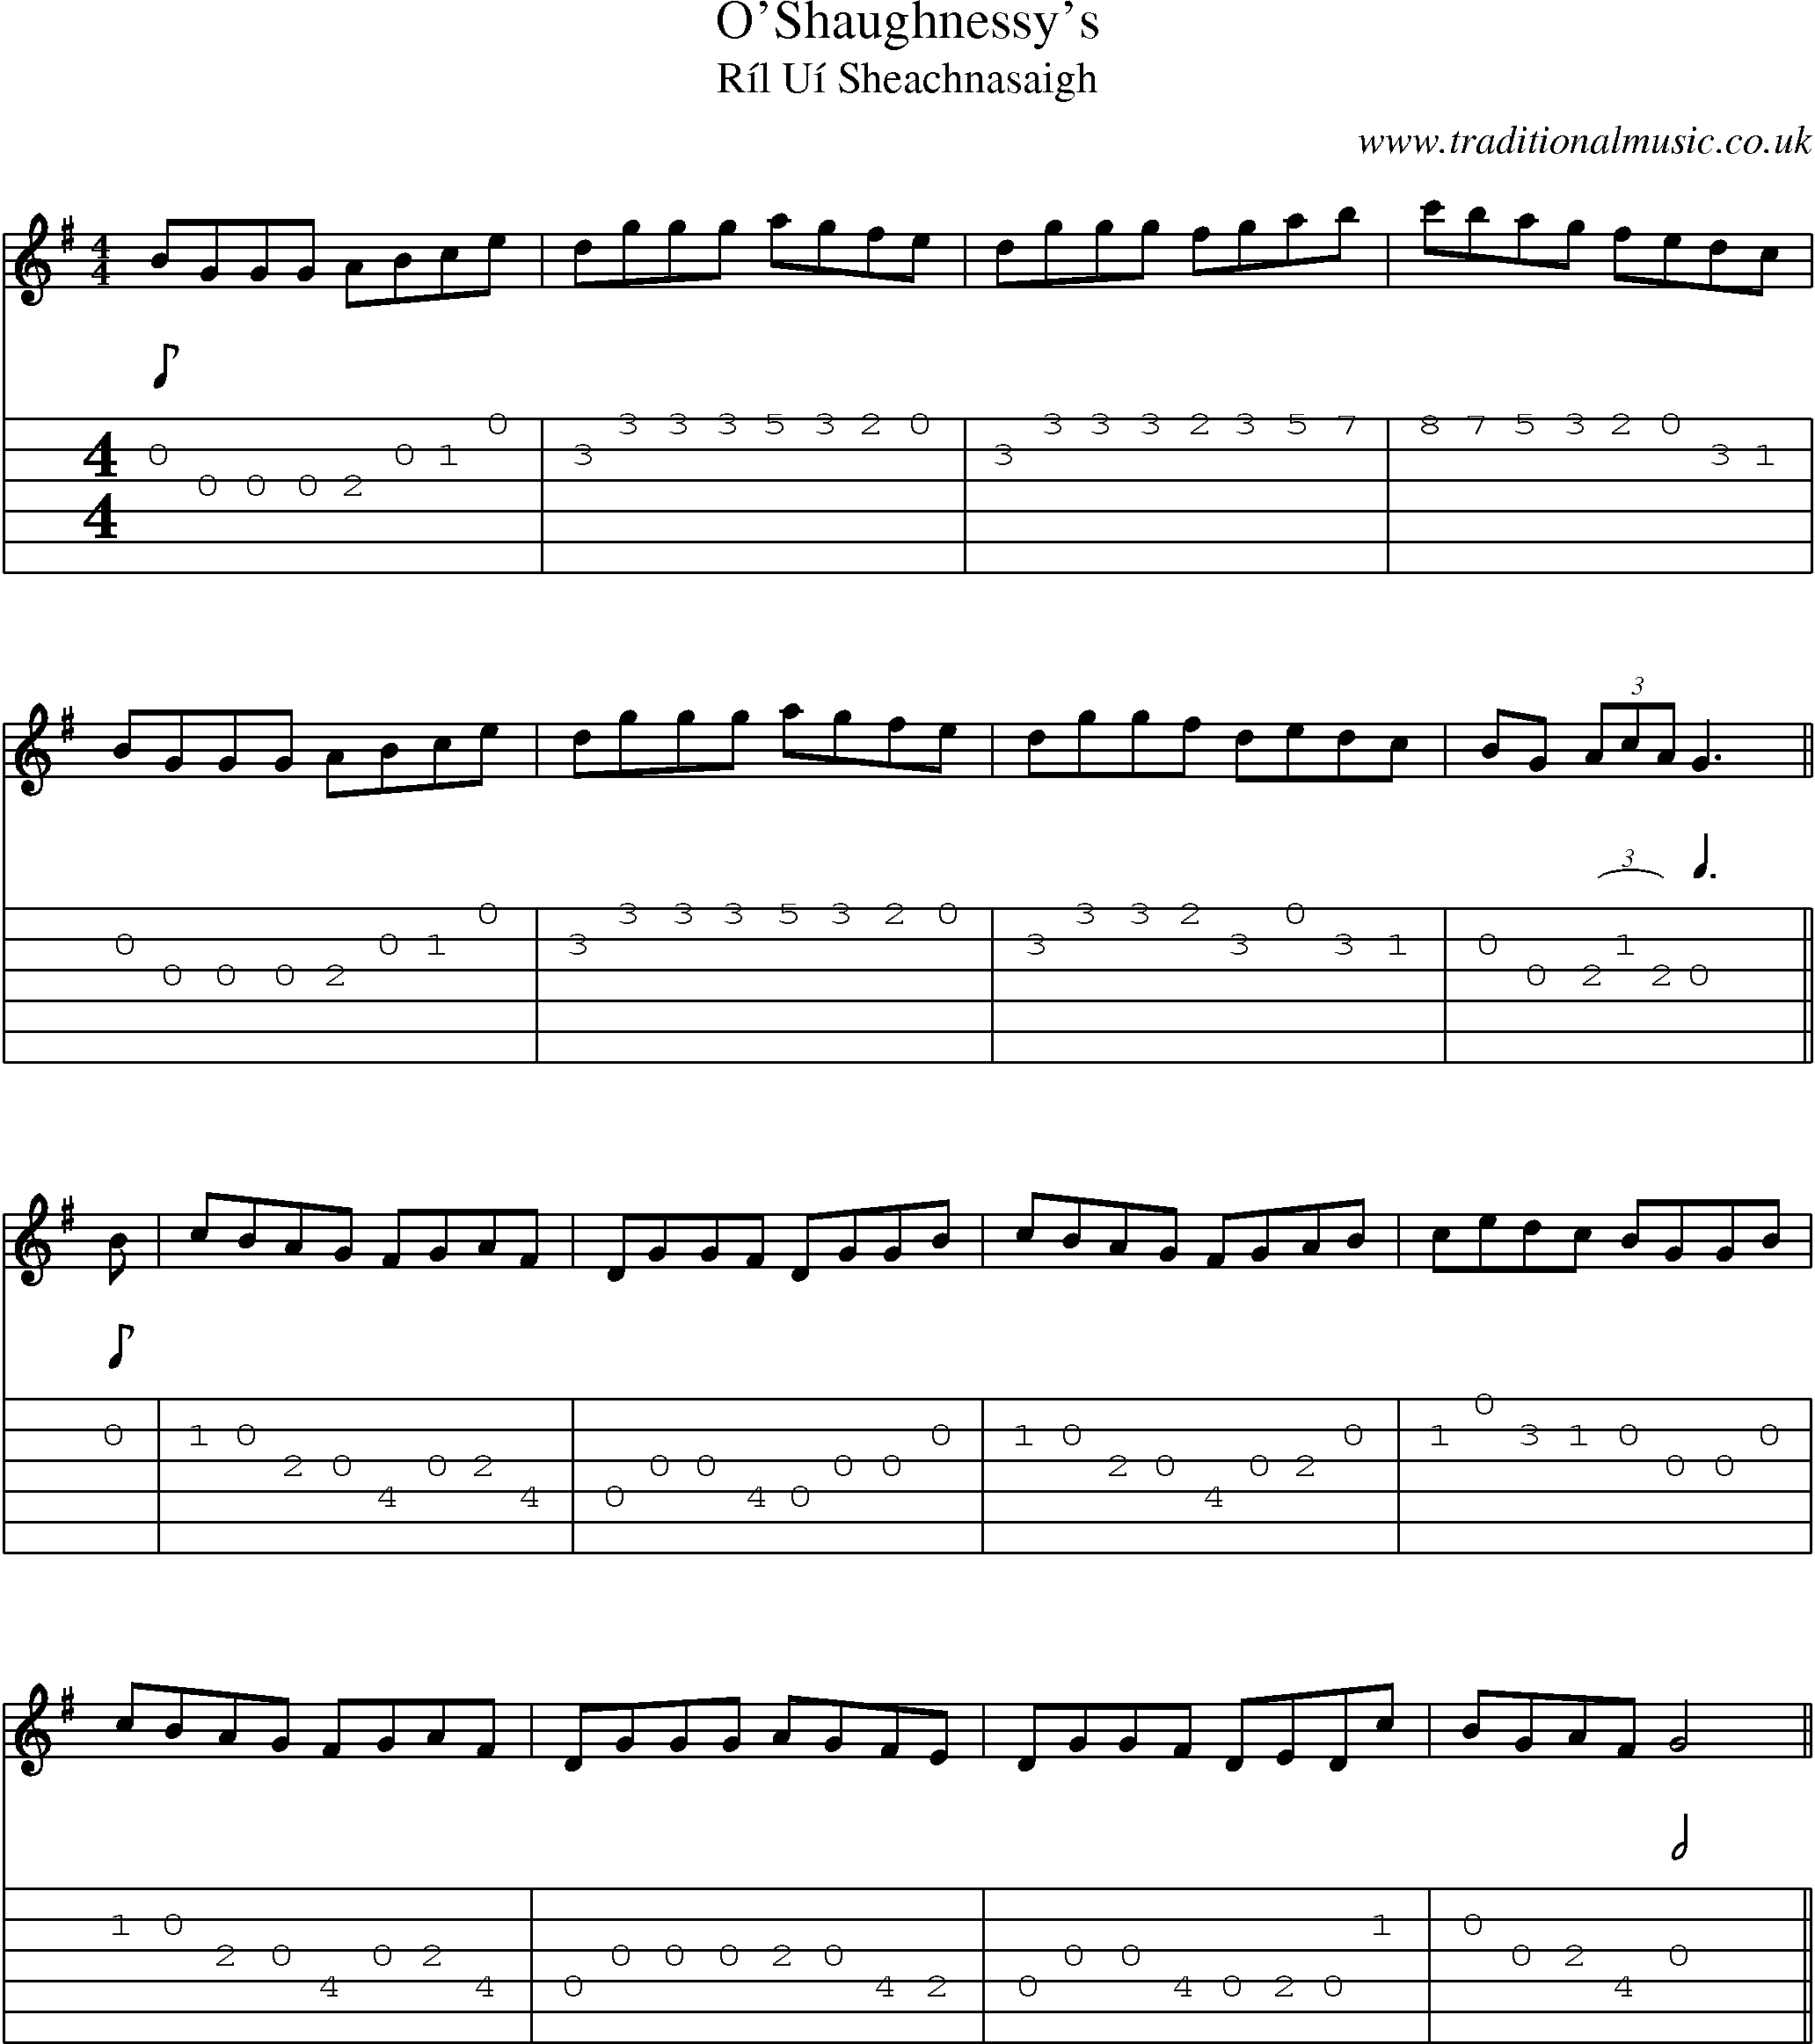 Music Score and Guitar Tabs for Oshaughnessys